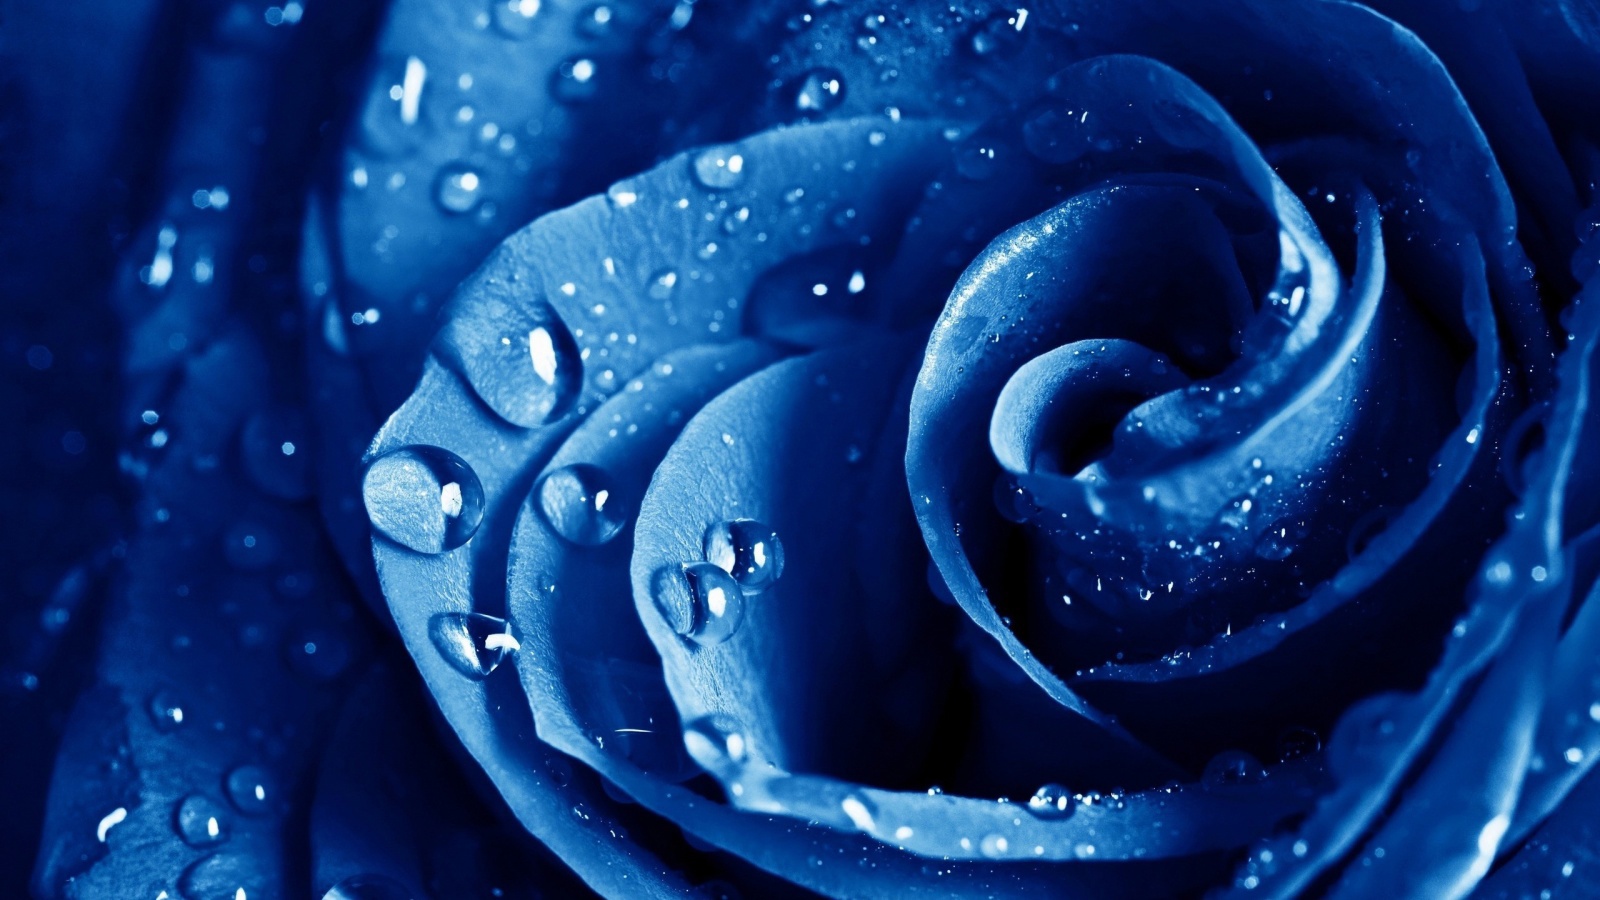 PSYCHIC BLUE ROSE-NEW CLIENTS ONLY PLEASE -6.00 DETAILED-Summer Special One emai - $6.00